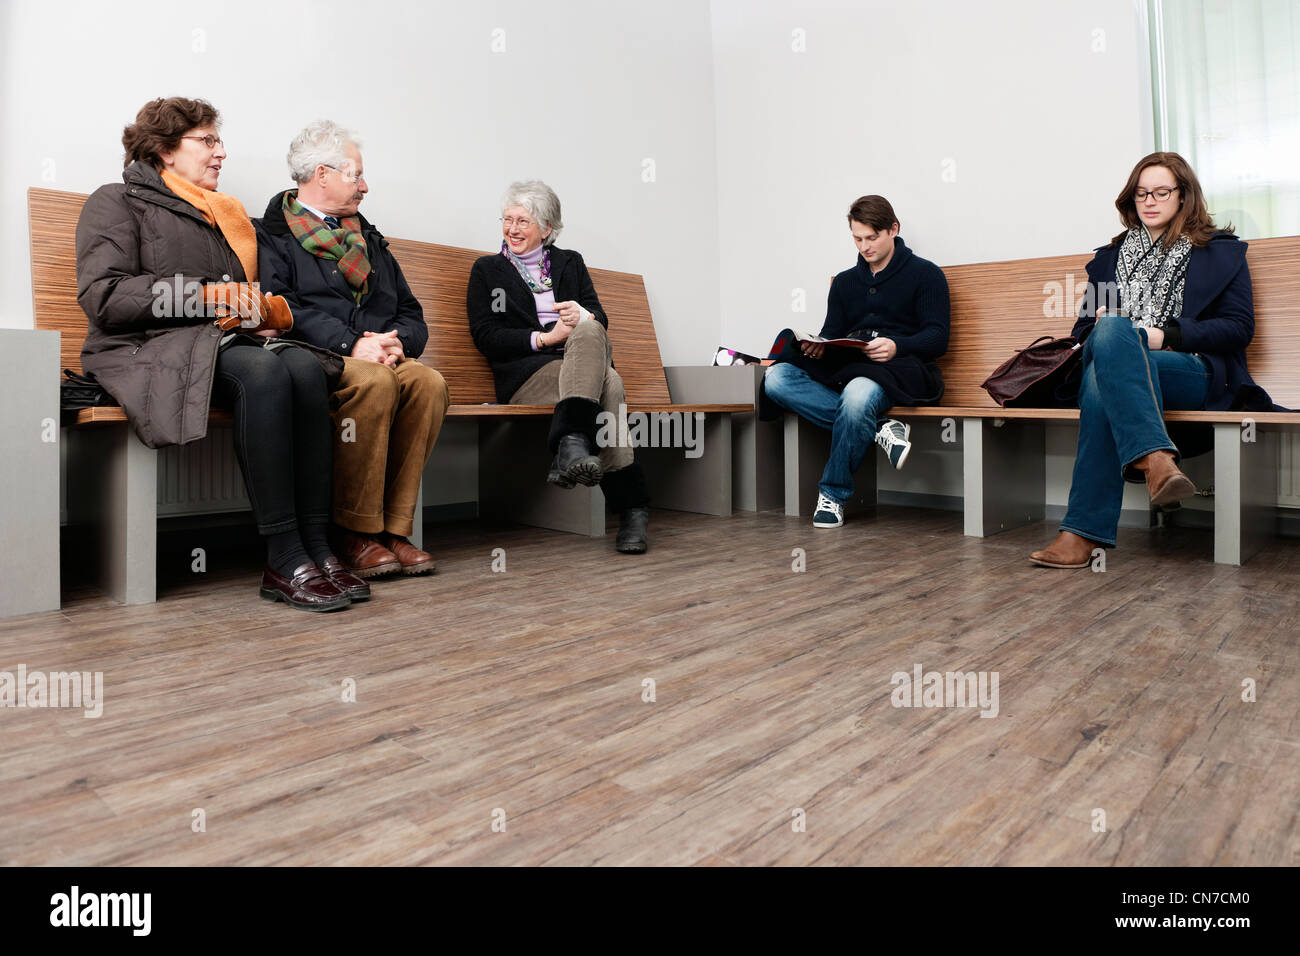 Several people from all ages sitting in a crowded hospital waiting area Stock Photo